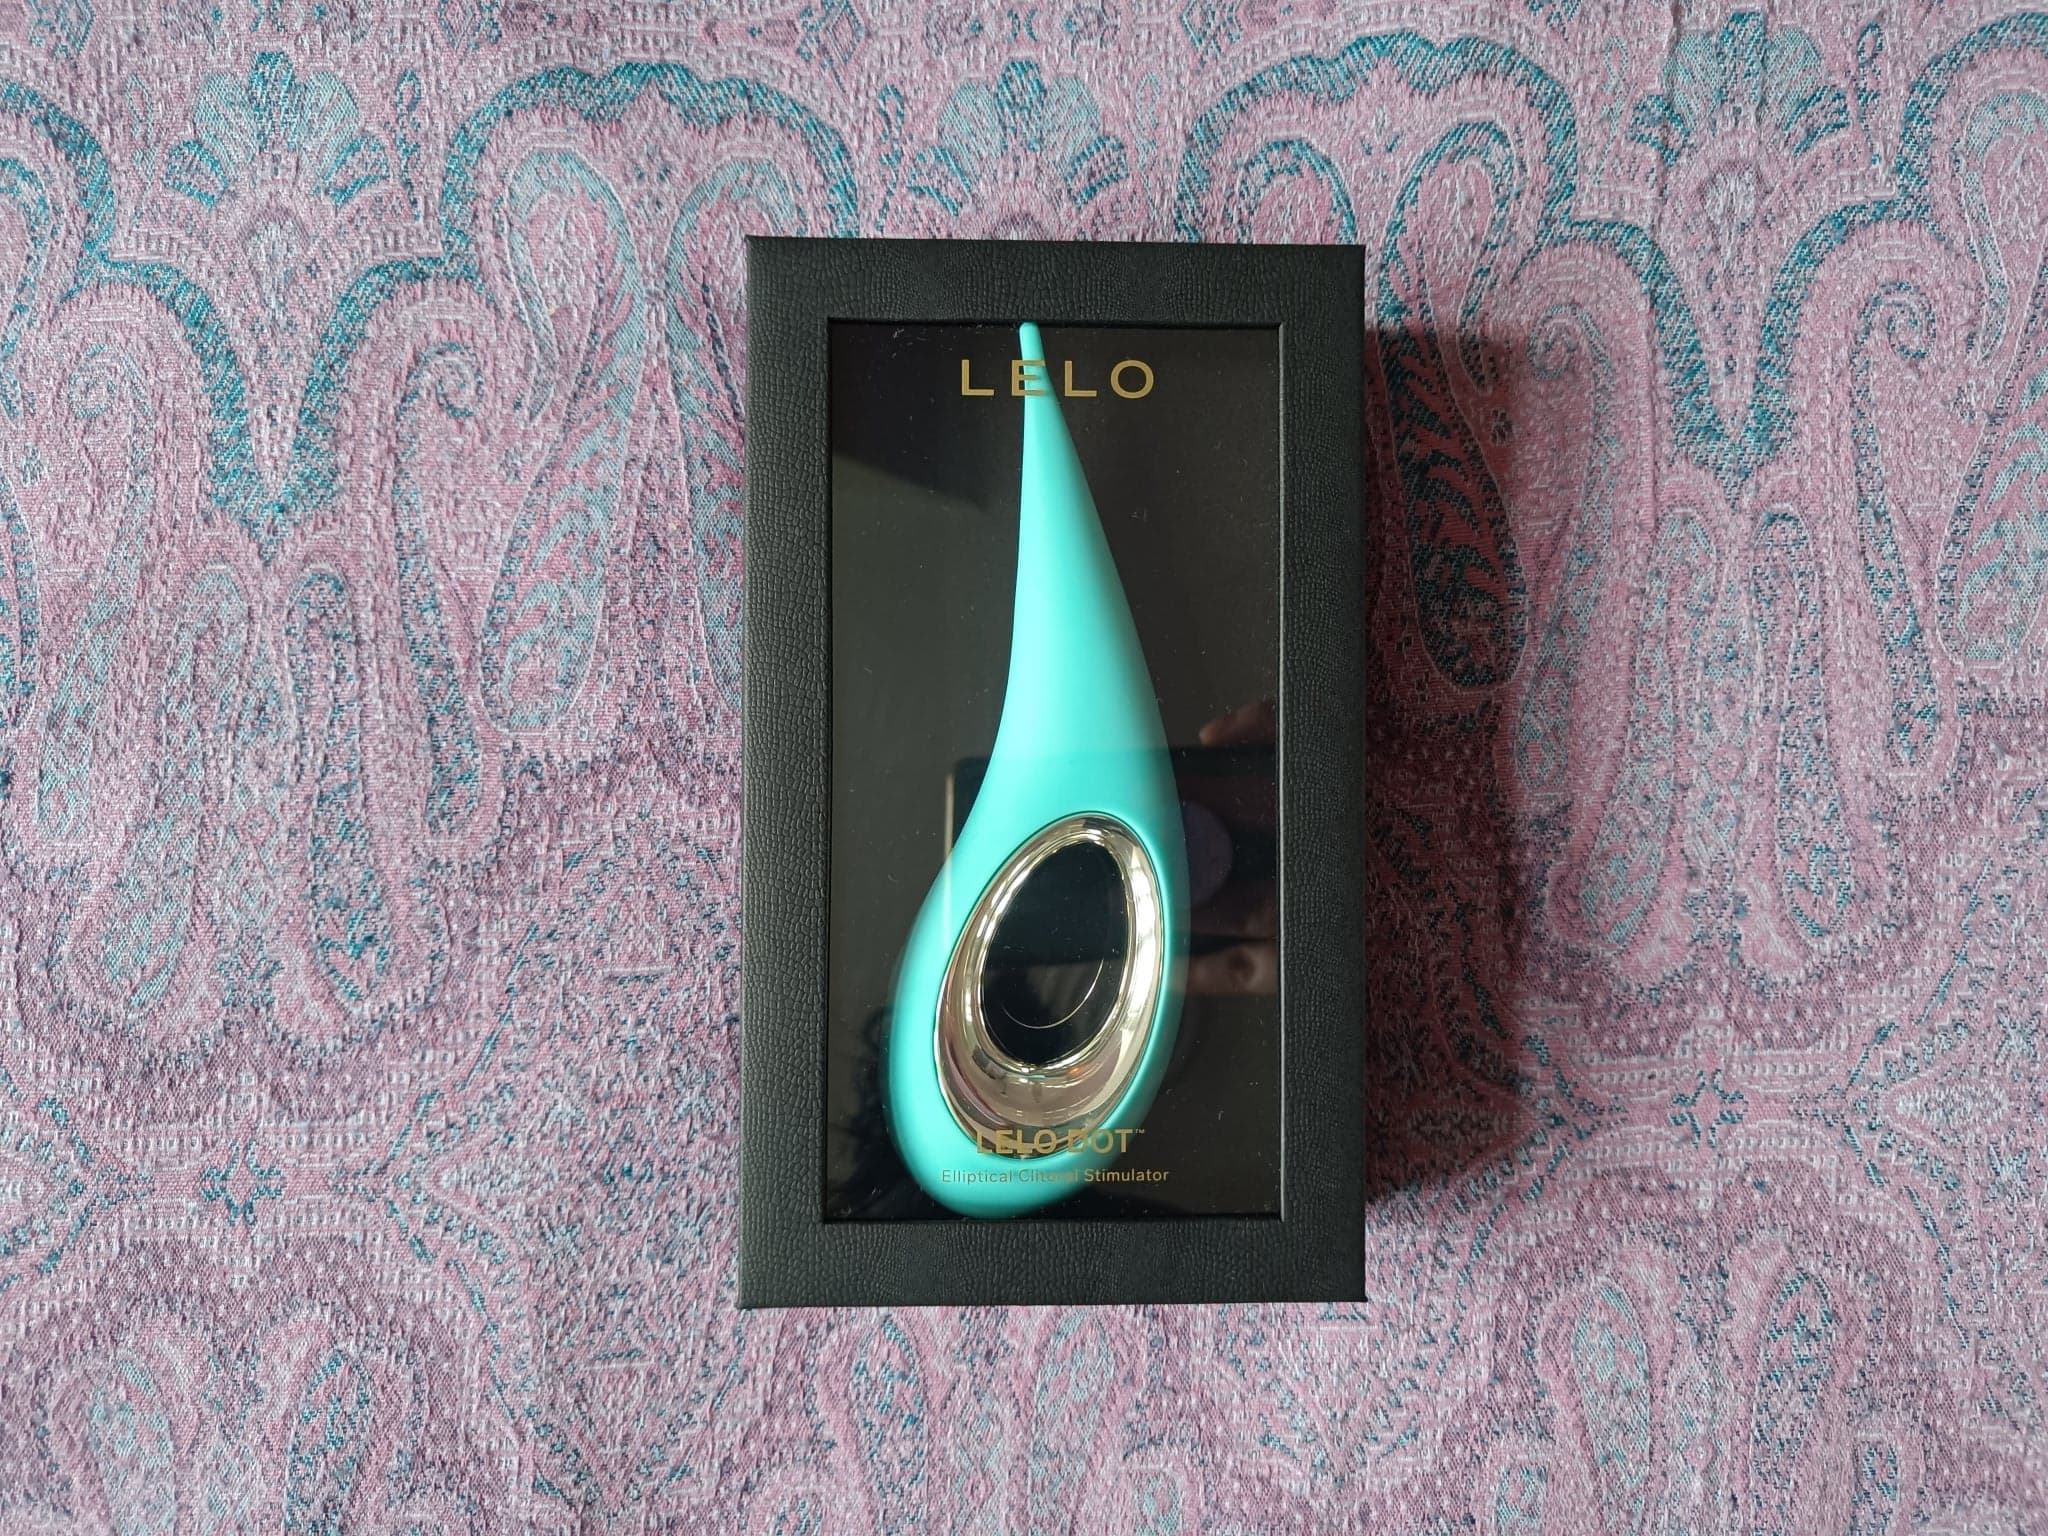 Lelo Dot Unwrapping Excitement: A Packaging Review